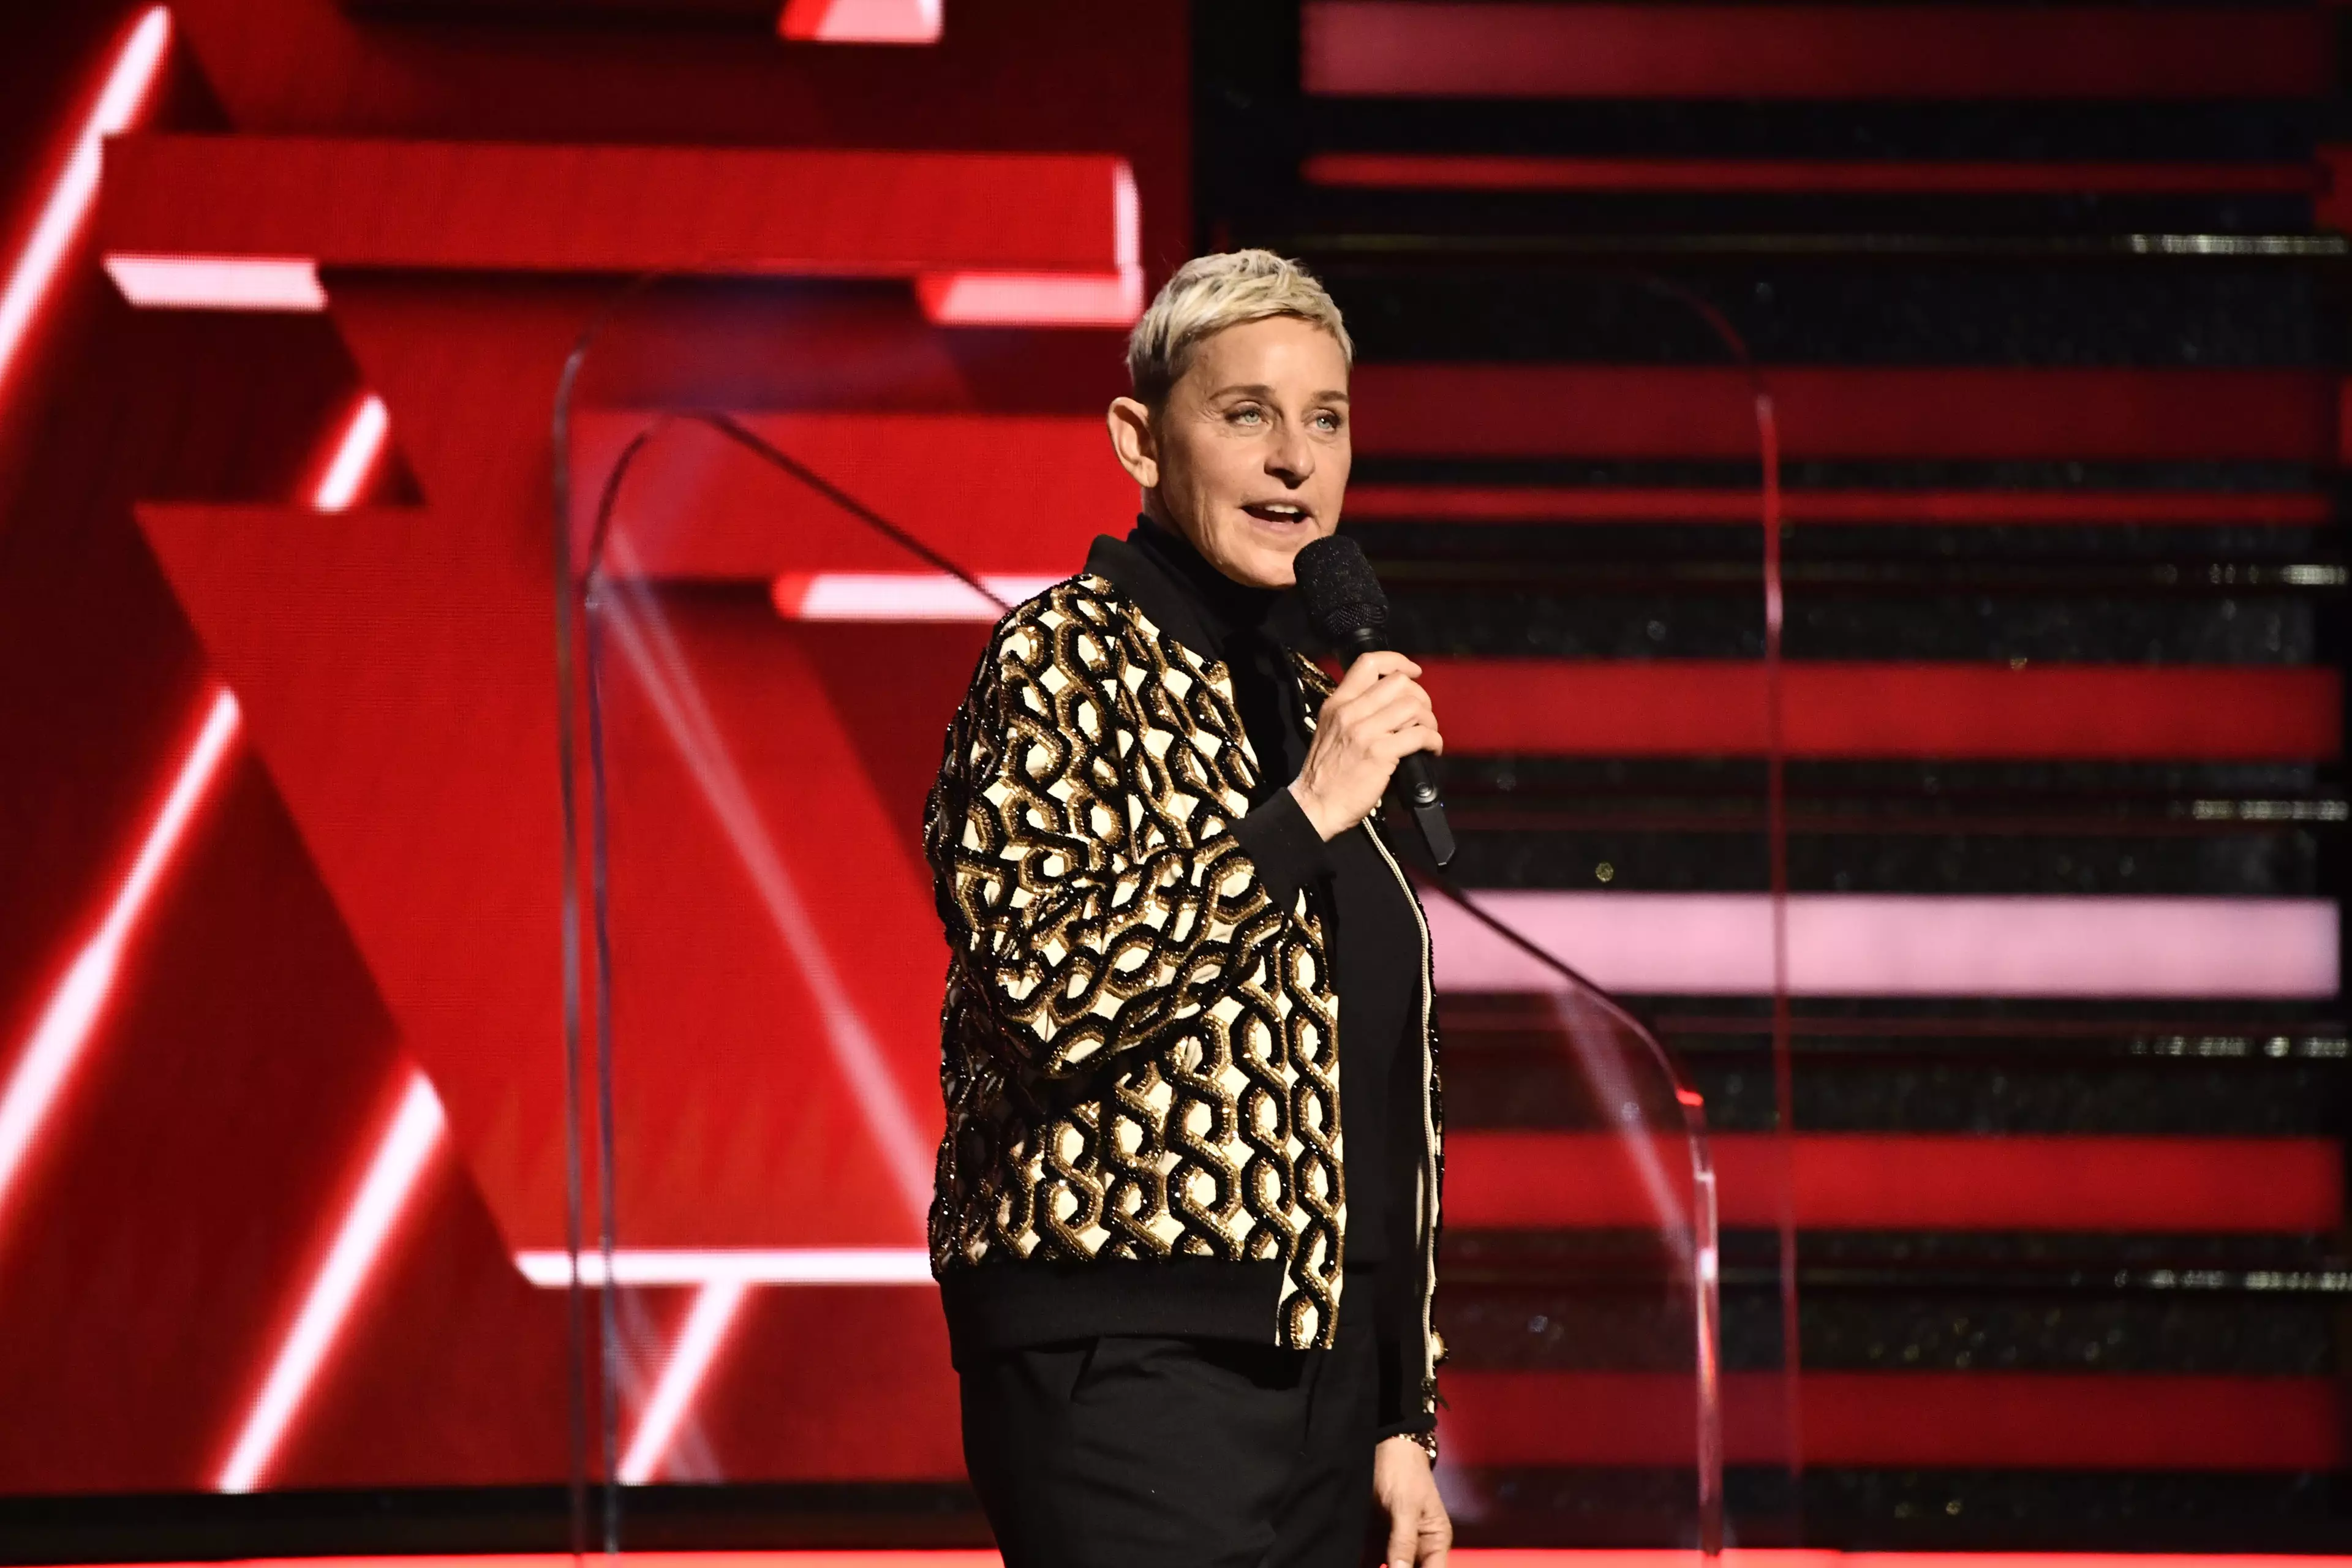 Ellen DeGeneres has addressed allegations of a 'toxic environment' on her show.